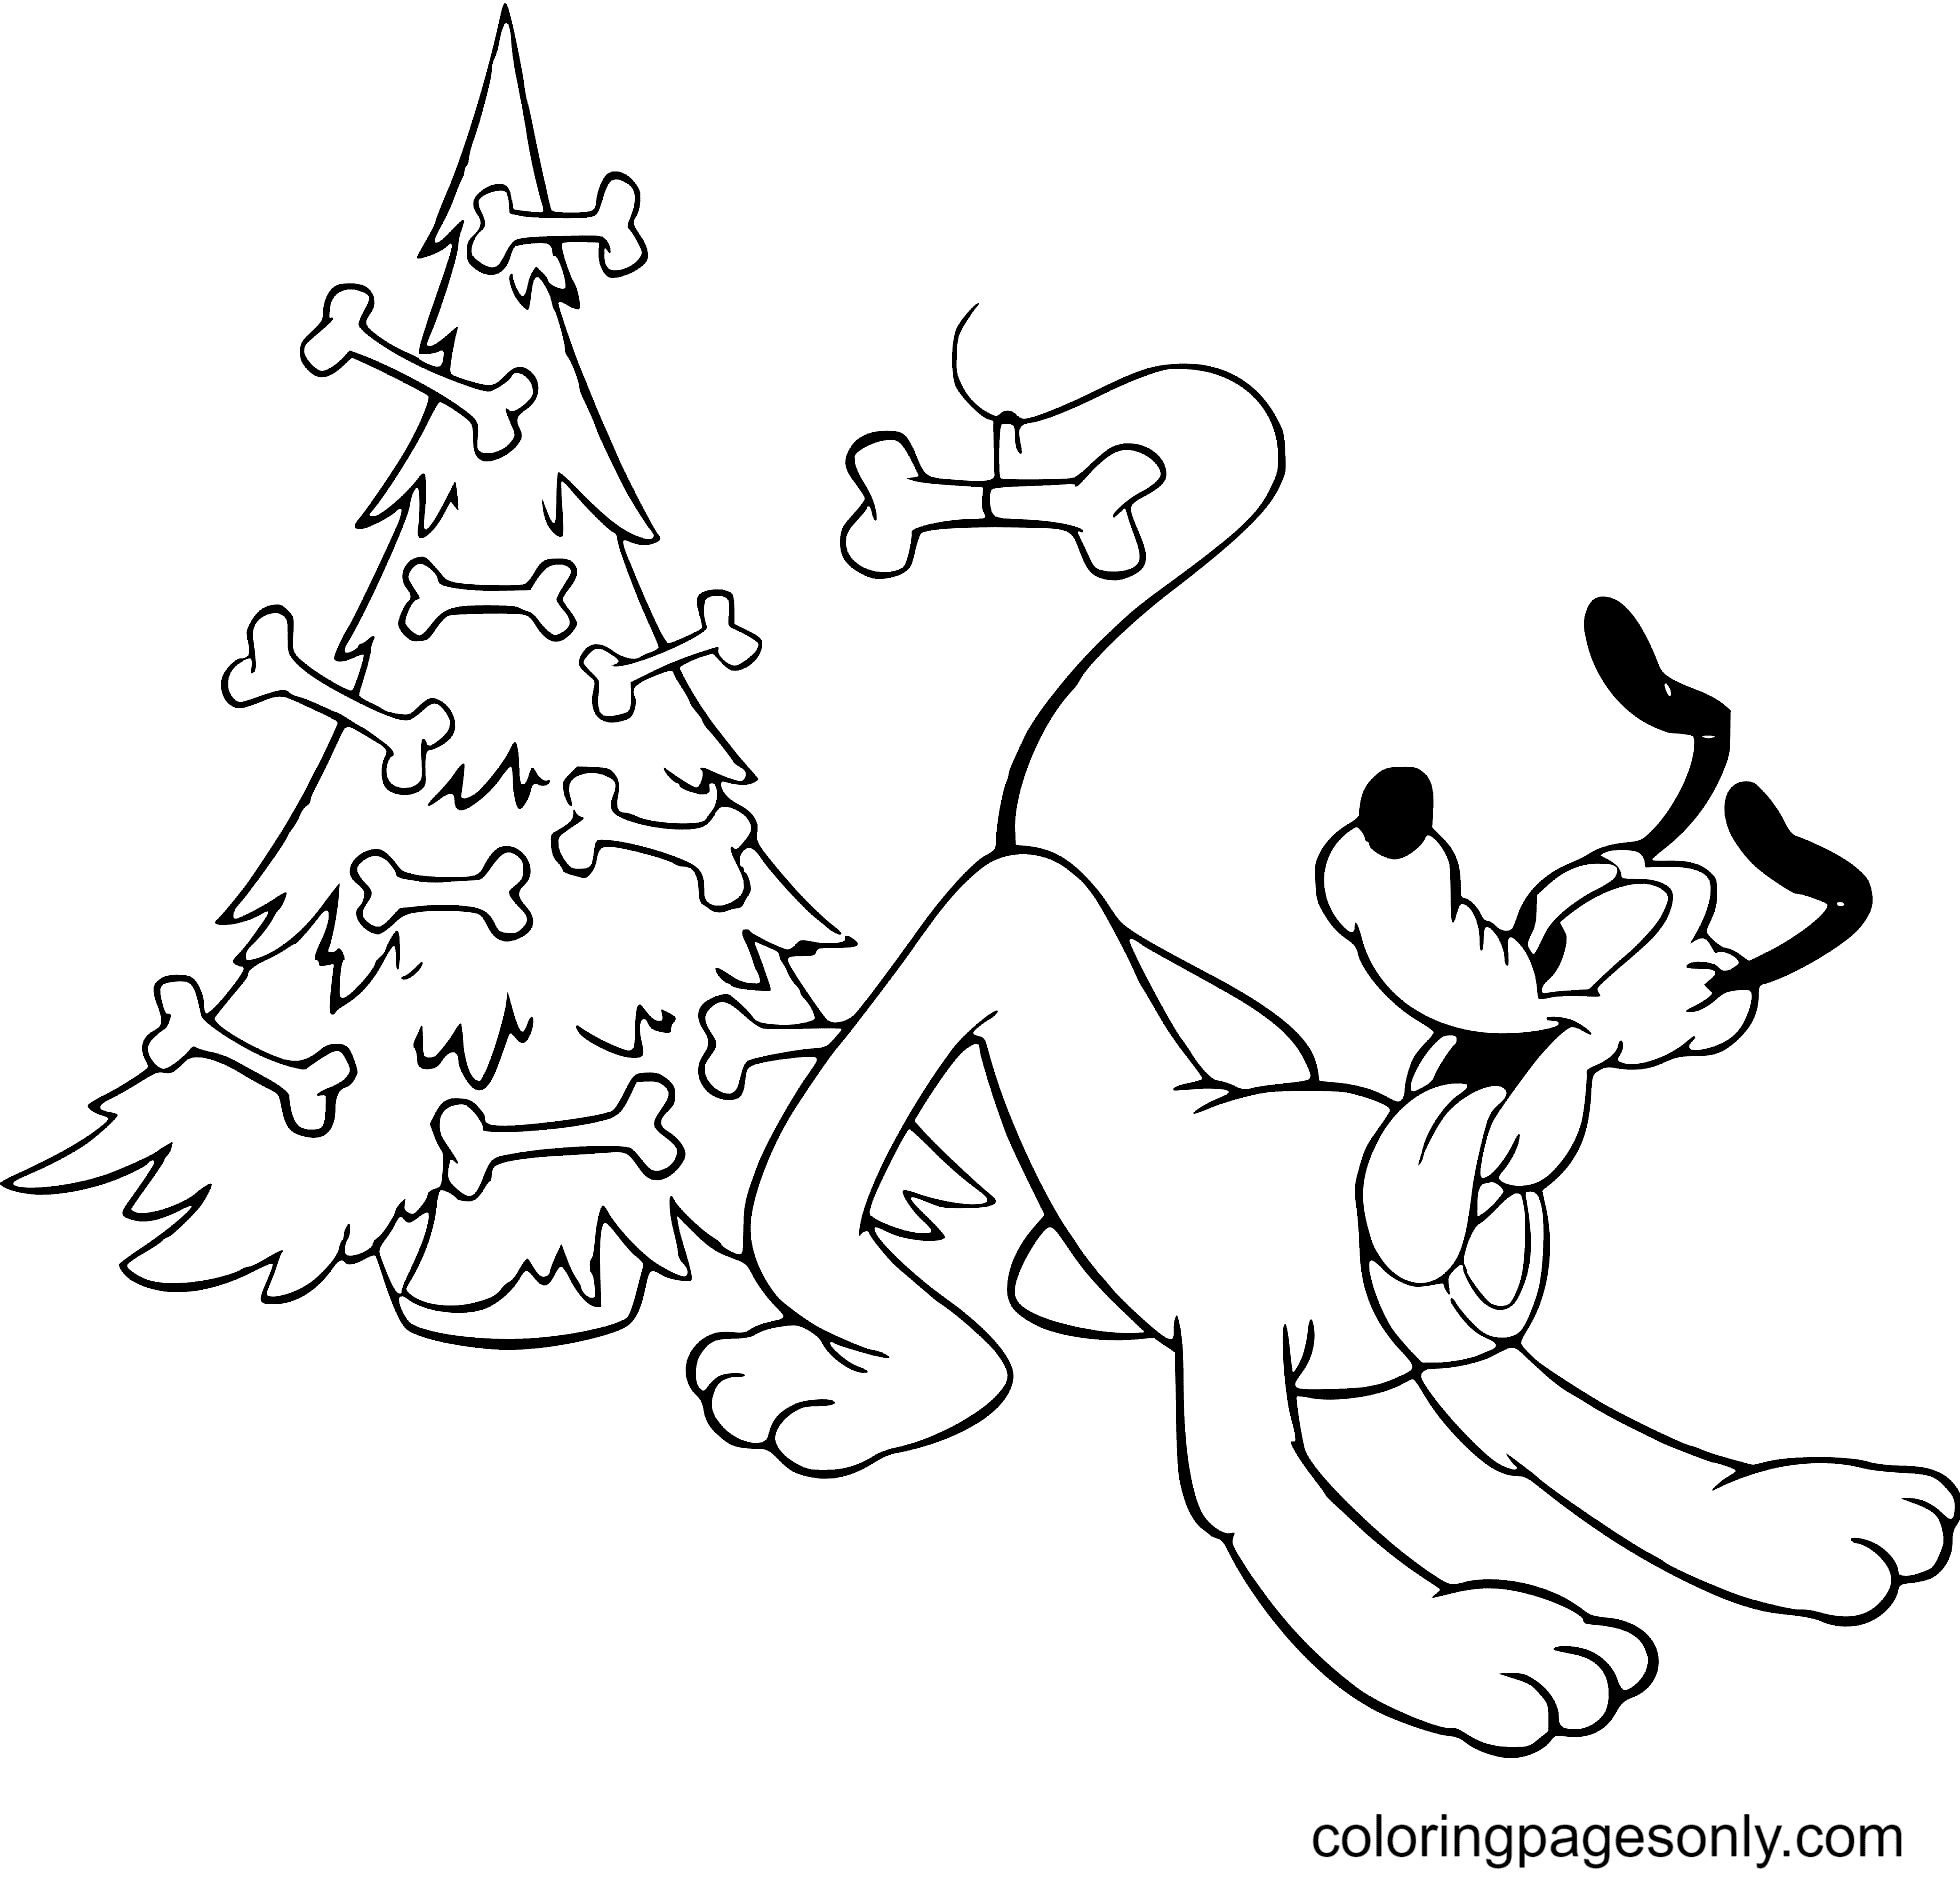 Pluto Decorating Tree with Bones Coloring Pages